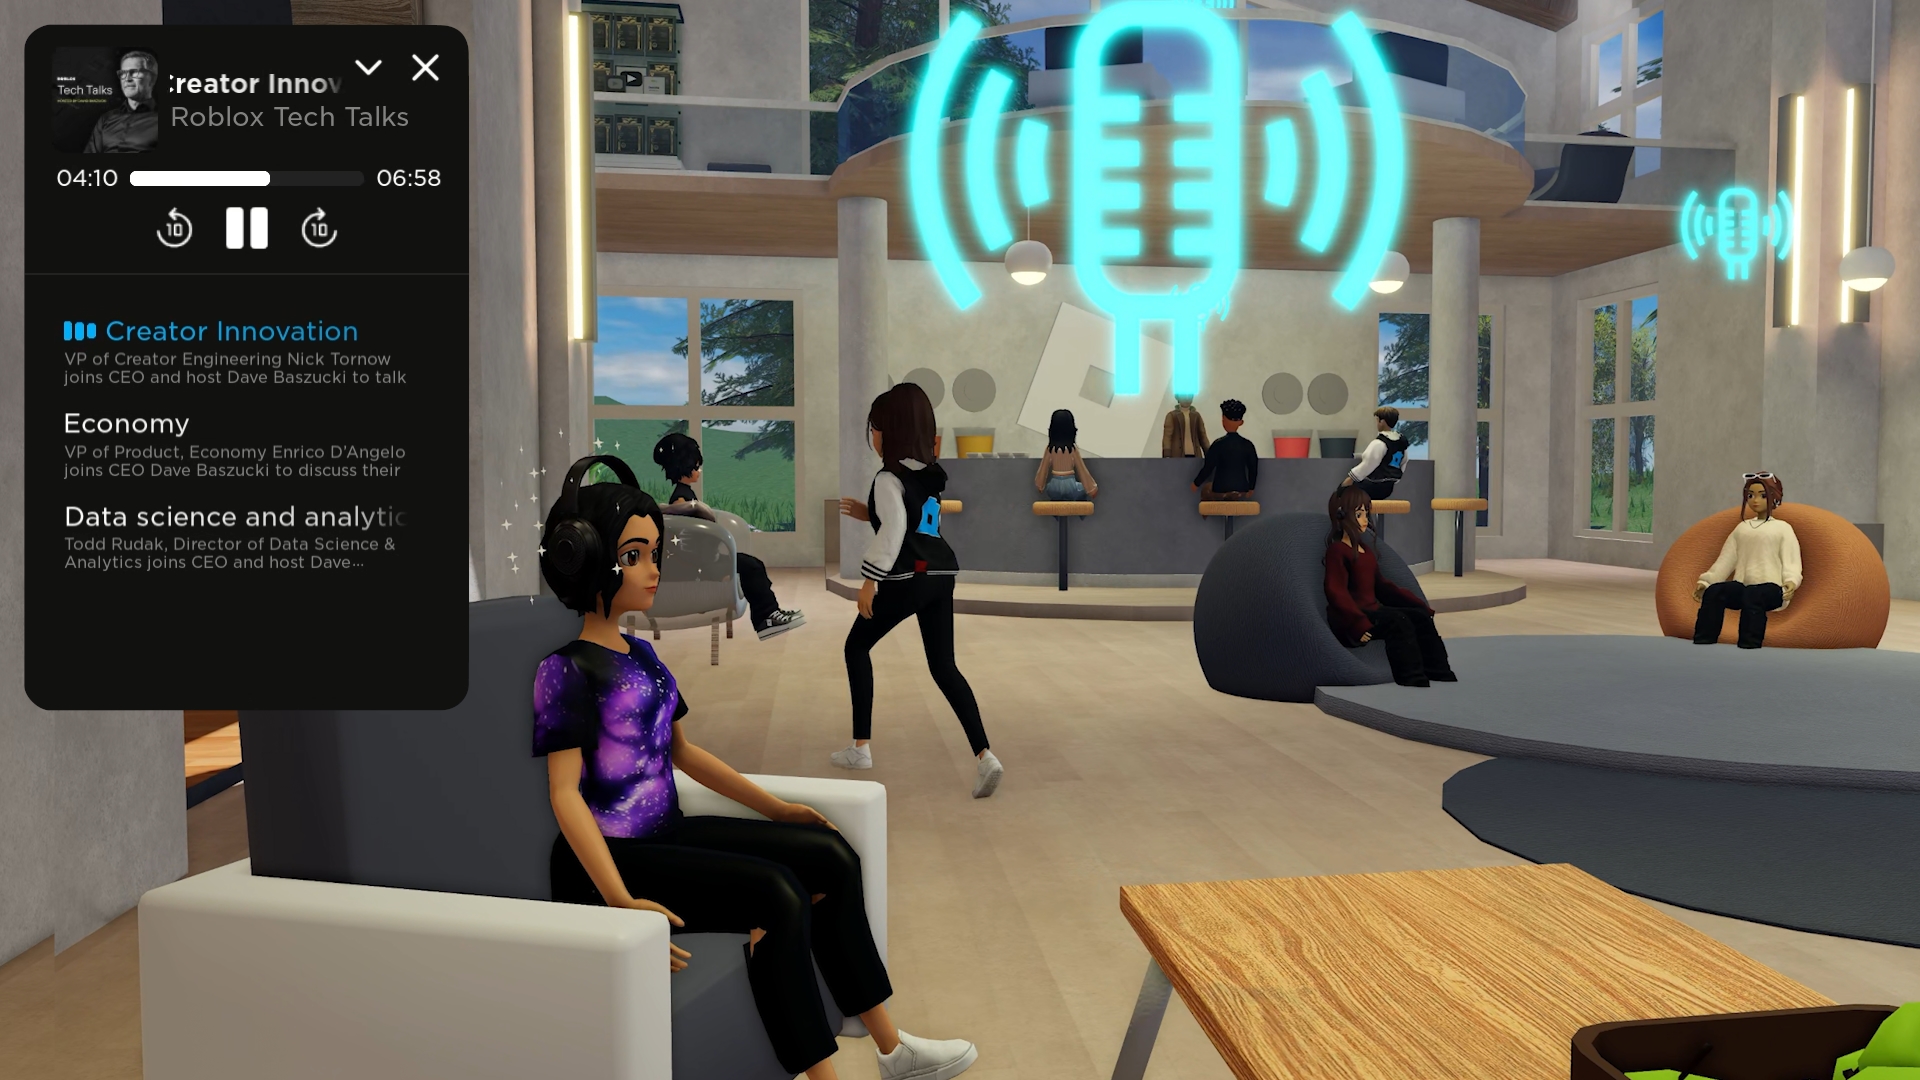 Introducing the Roblox Career Center: A new way to experience recruiting